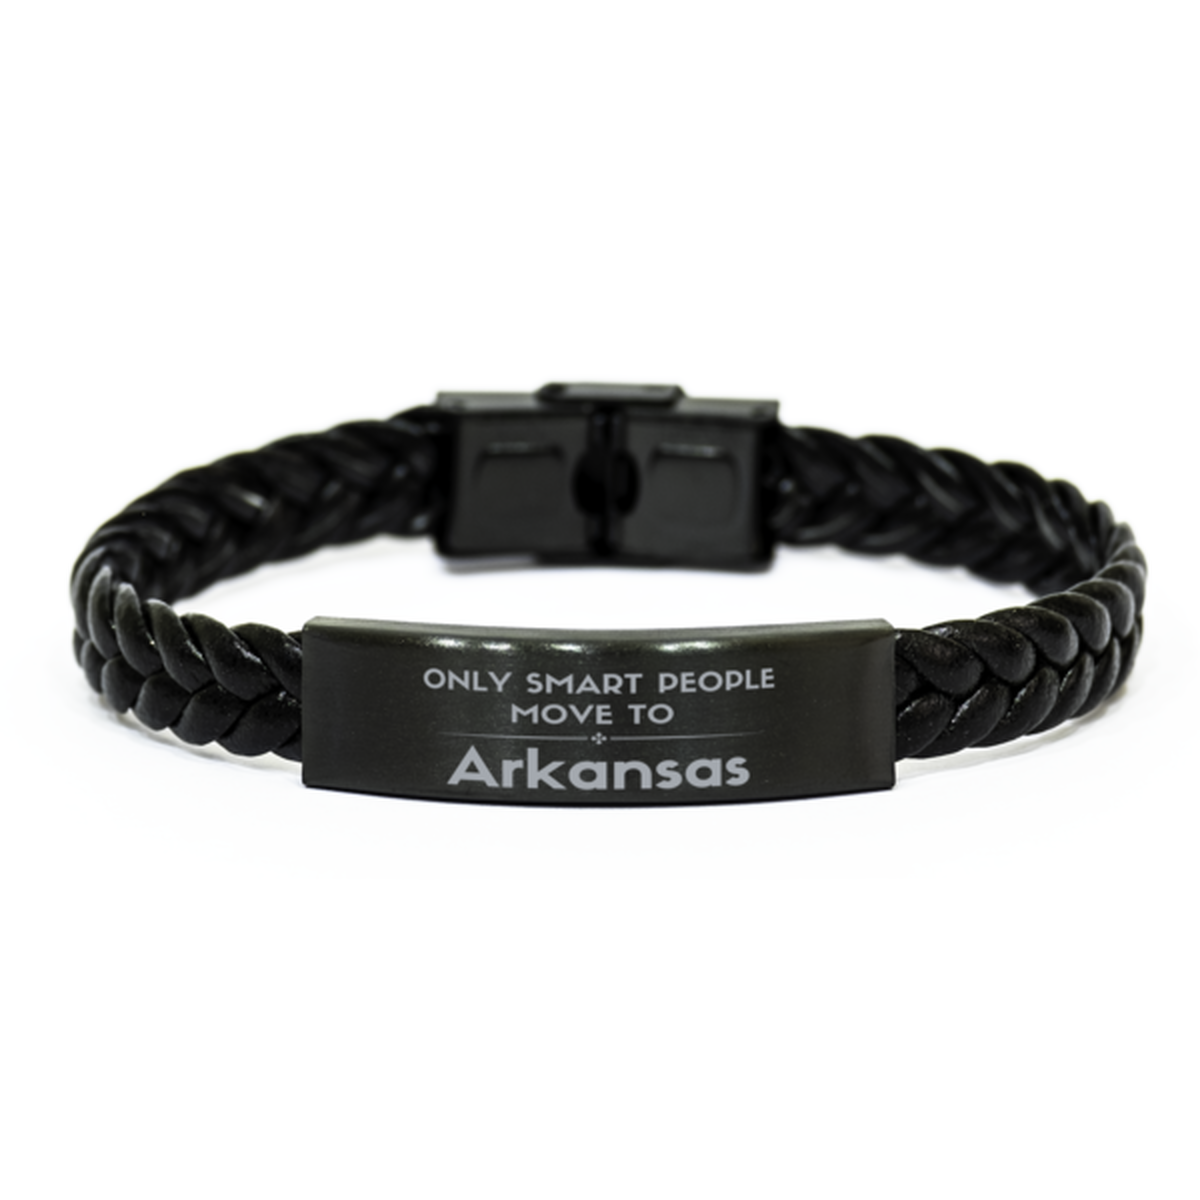 Only smart people move to Arkansas Braided Leather Bracelet, Gag Gifts For Arkansas, Move to Arkansas Gifts for Friends Coworker Funny Saying Quote